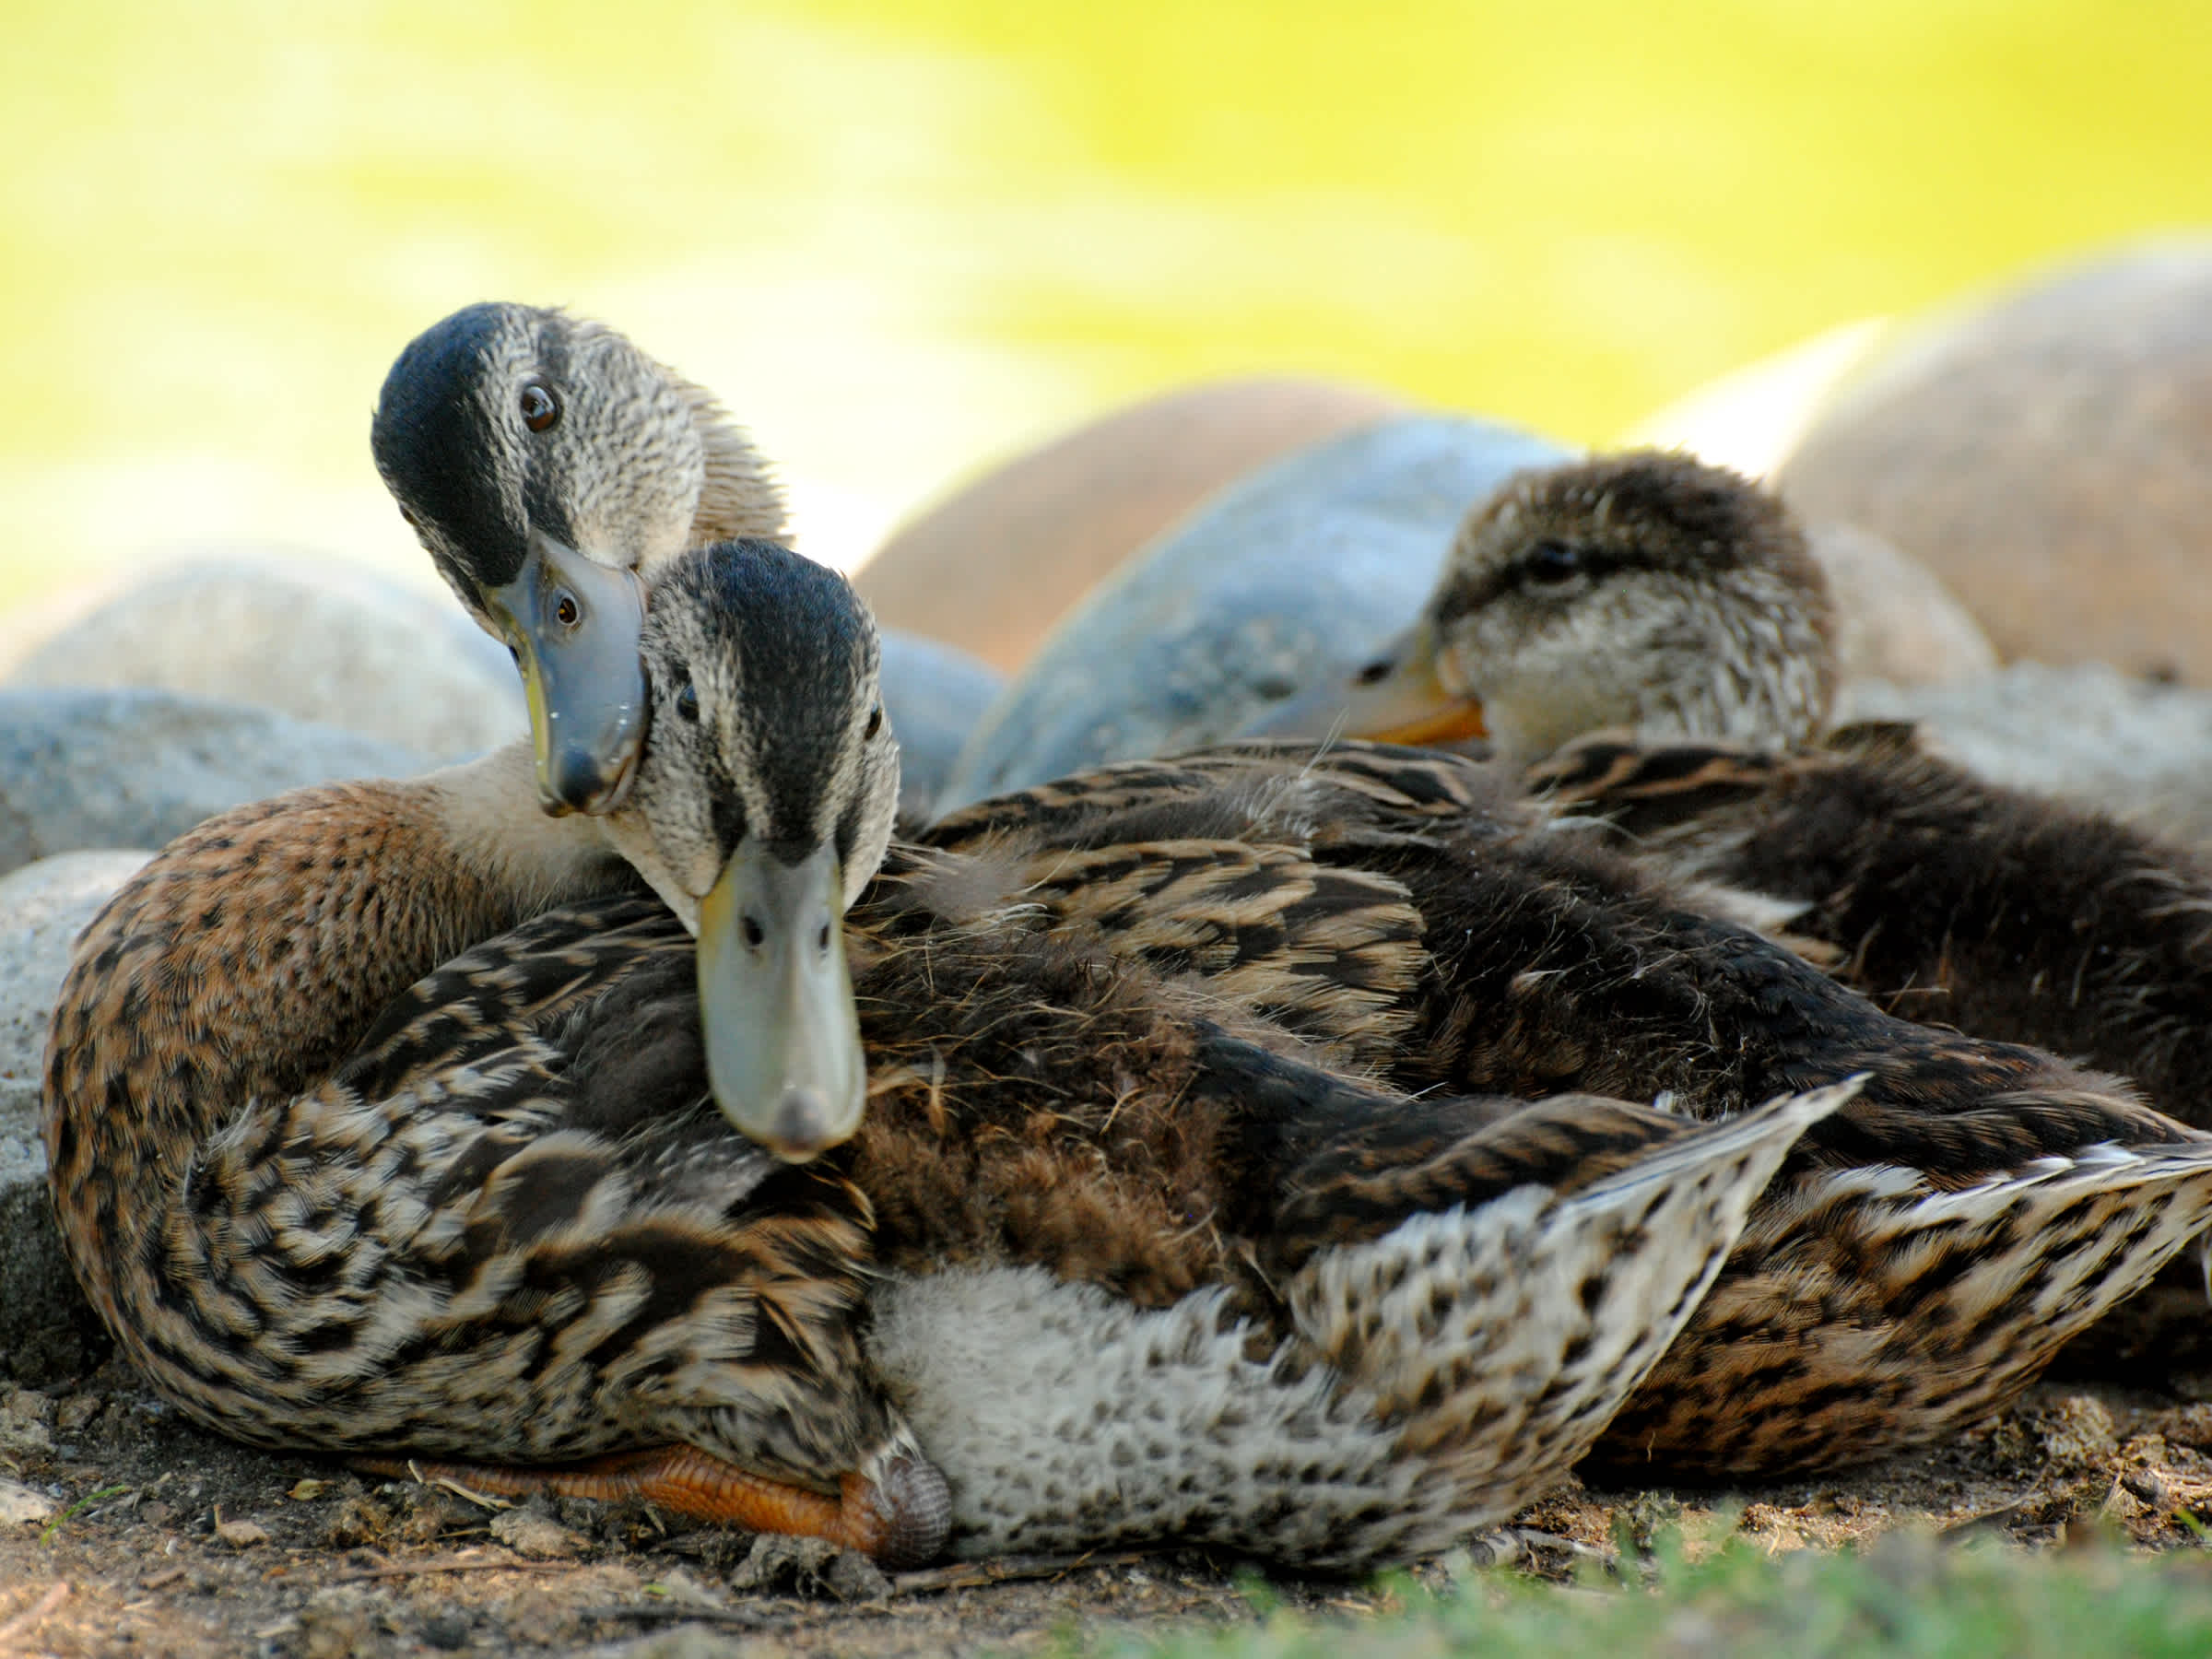 Ducks rubbing heads together.